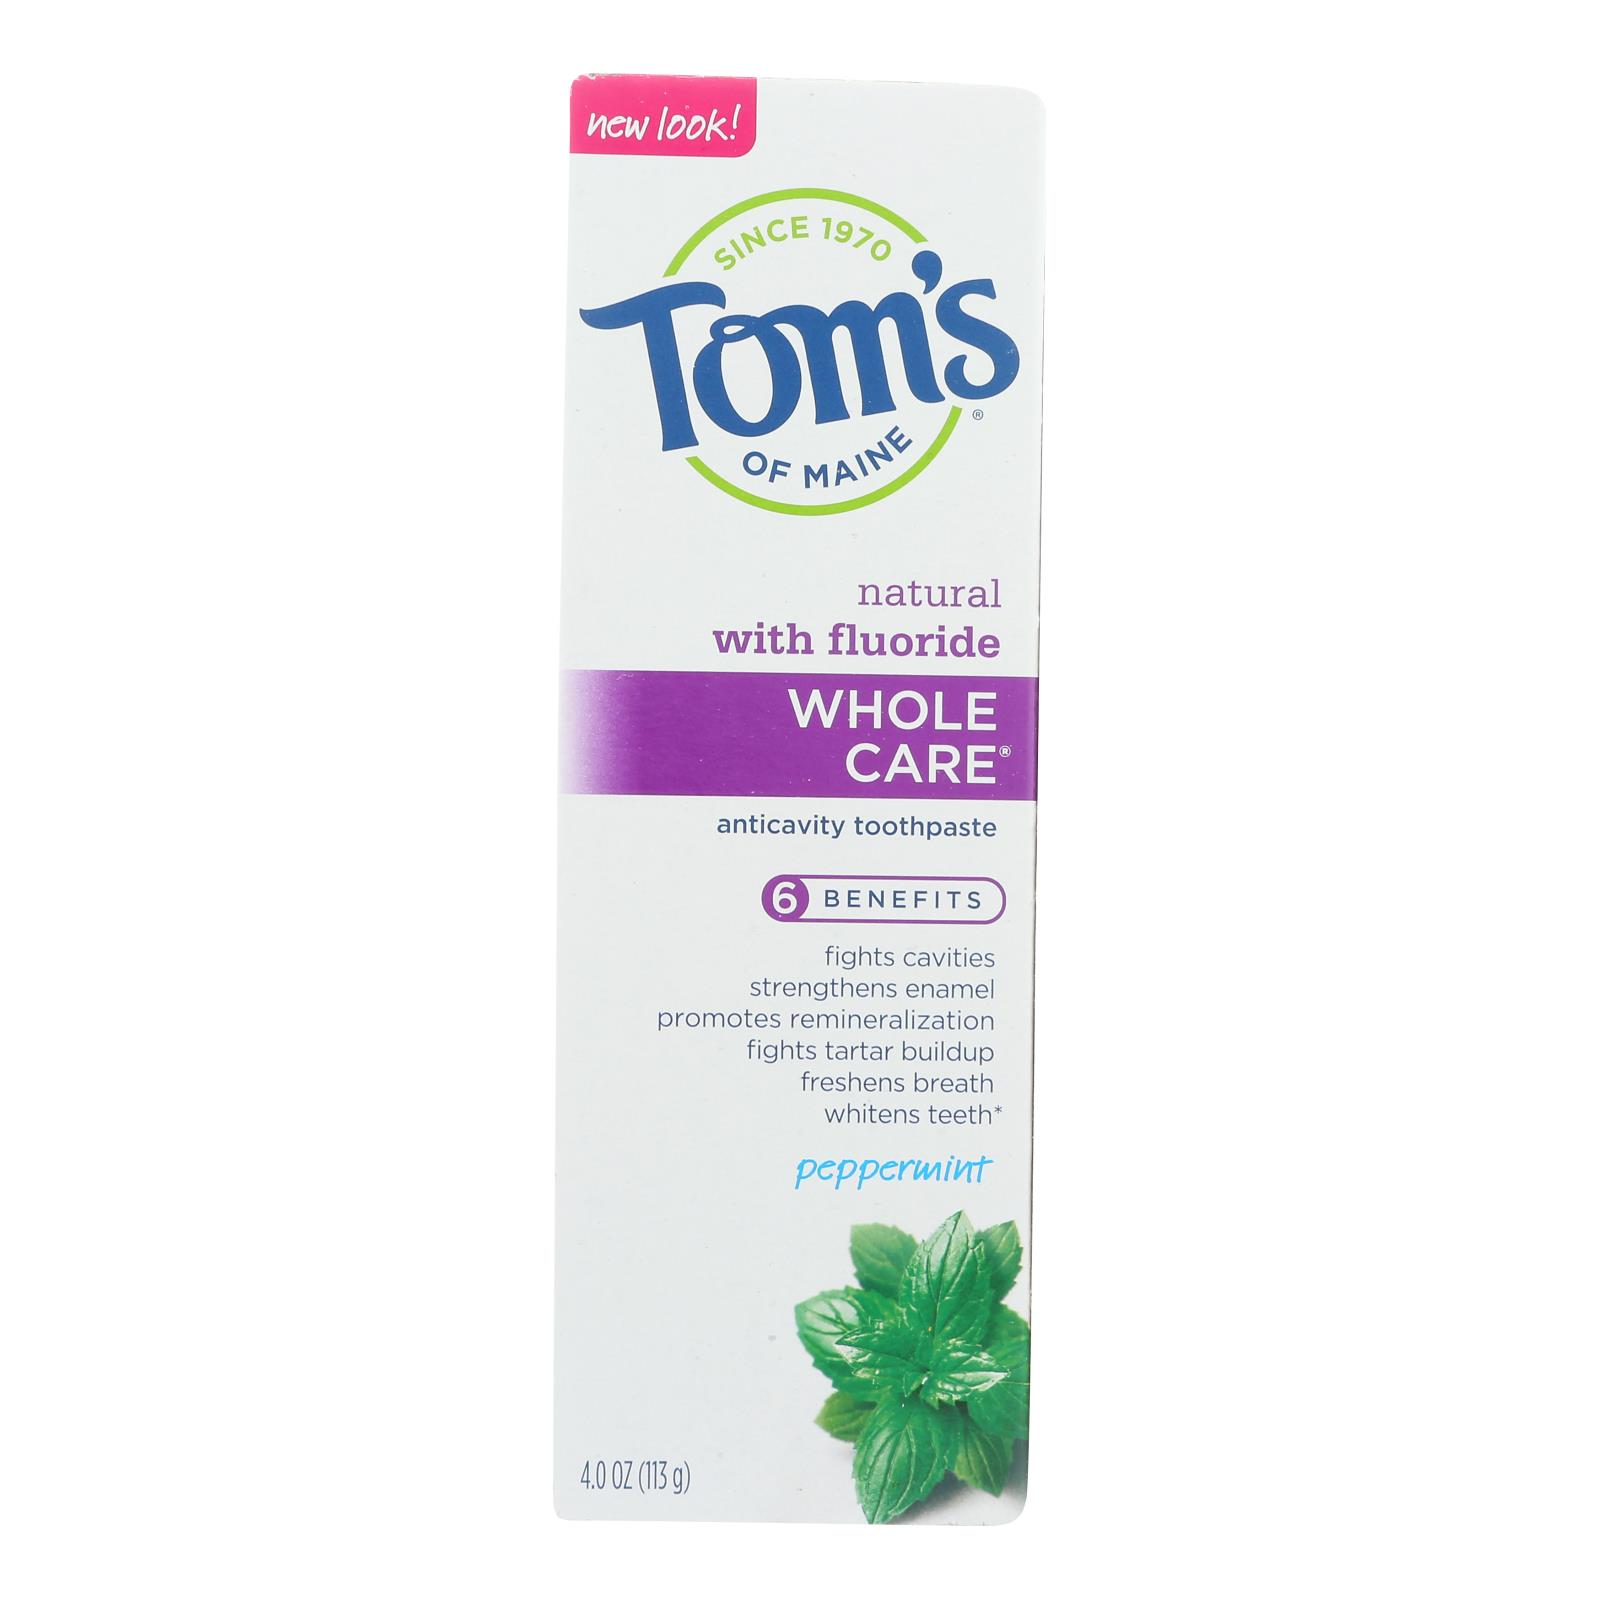 Tom's Of Maine - Tp Whole Care Ppmnt Fluor - 6개 묶음상품 - 4 OZ